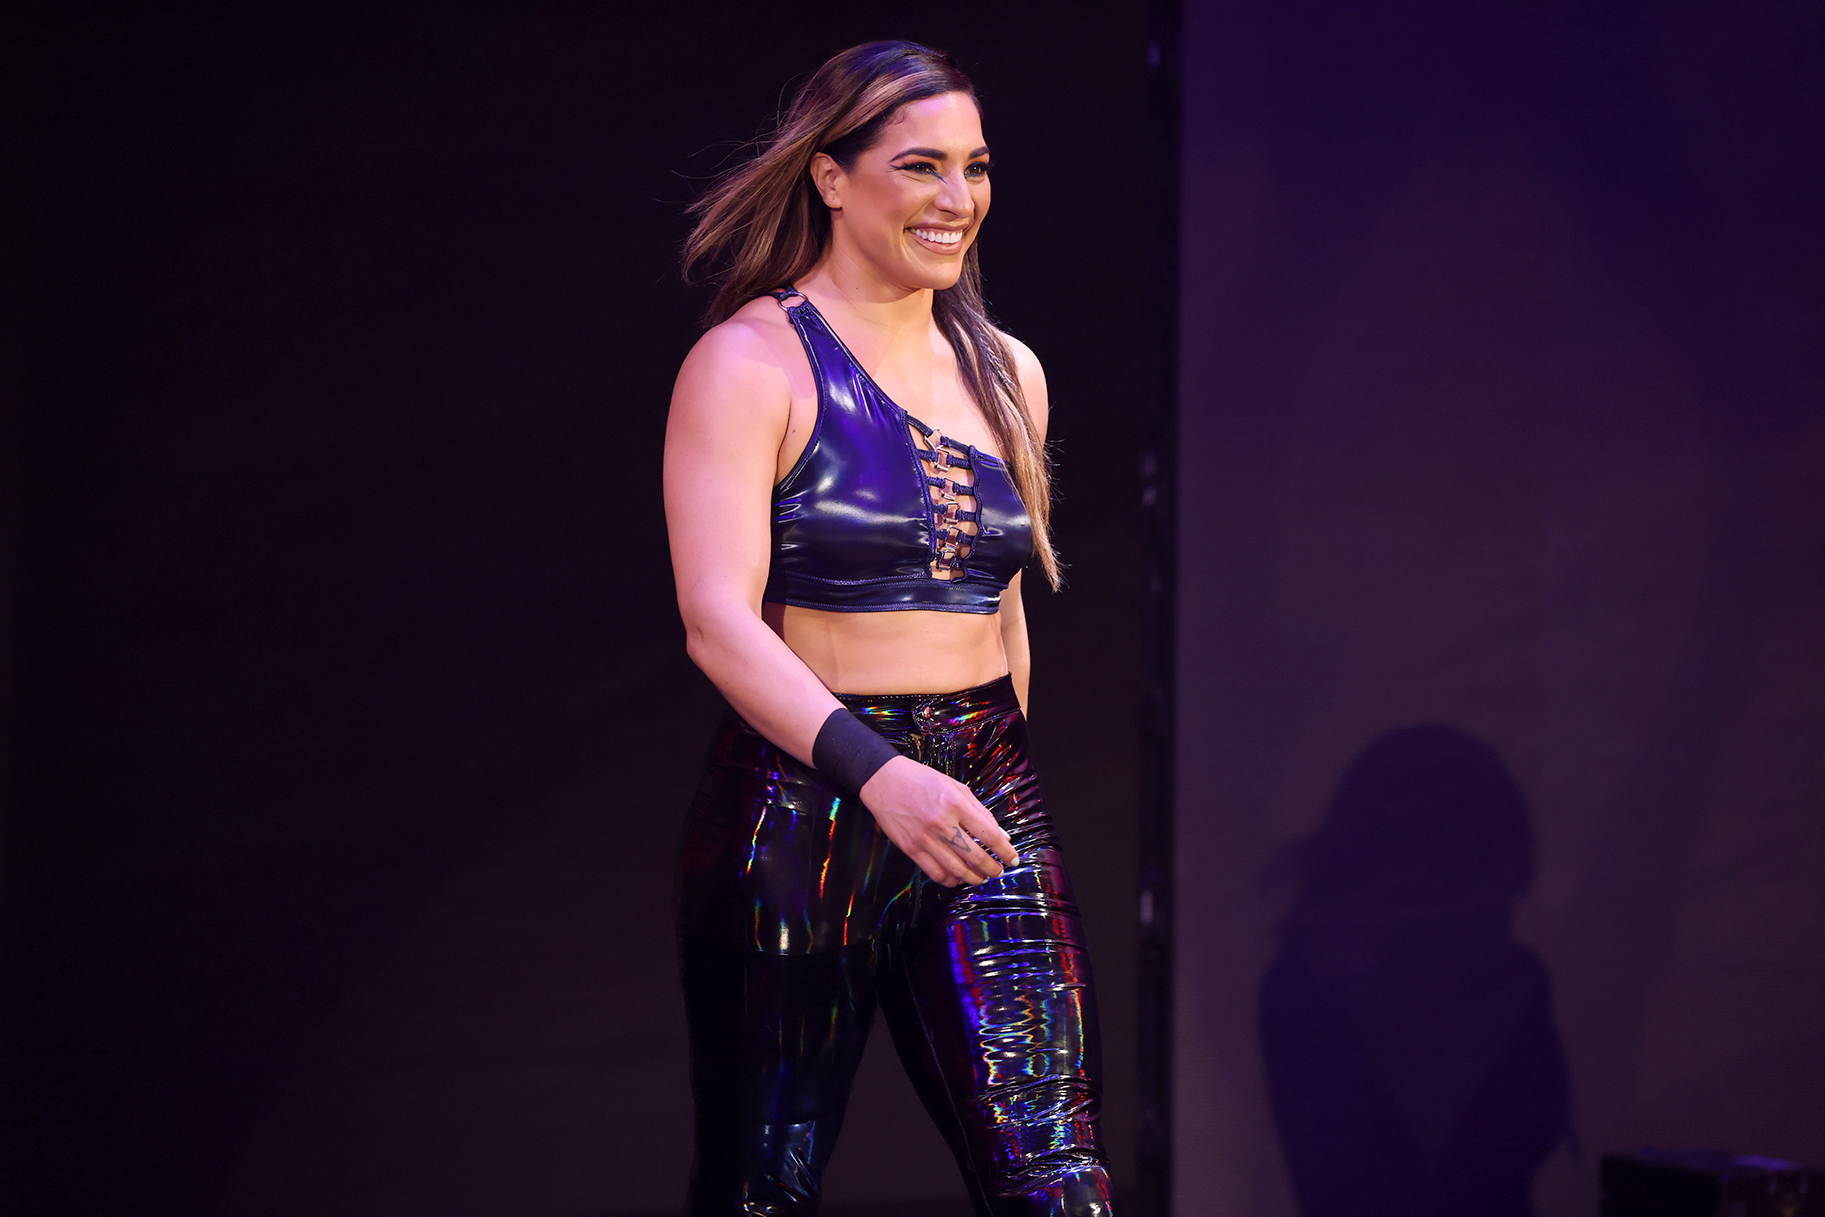 Exclusive: Raquel Rodriguez On WWE's Successful Women's Division | USA Insider